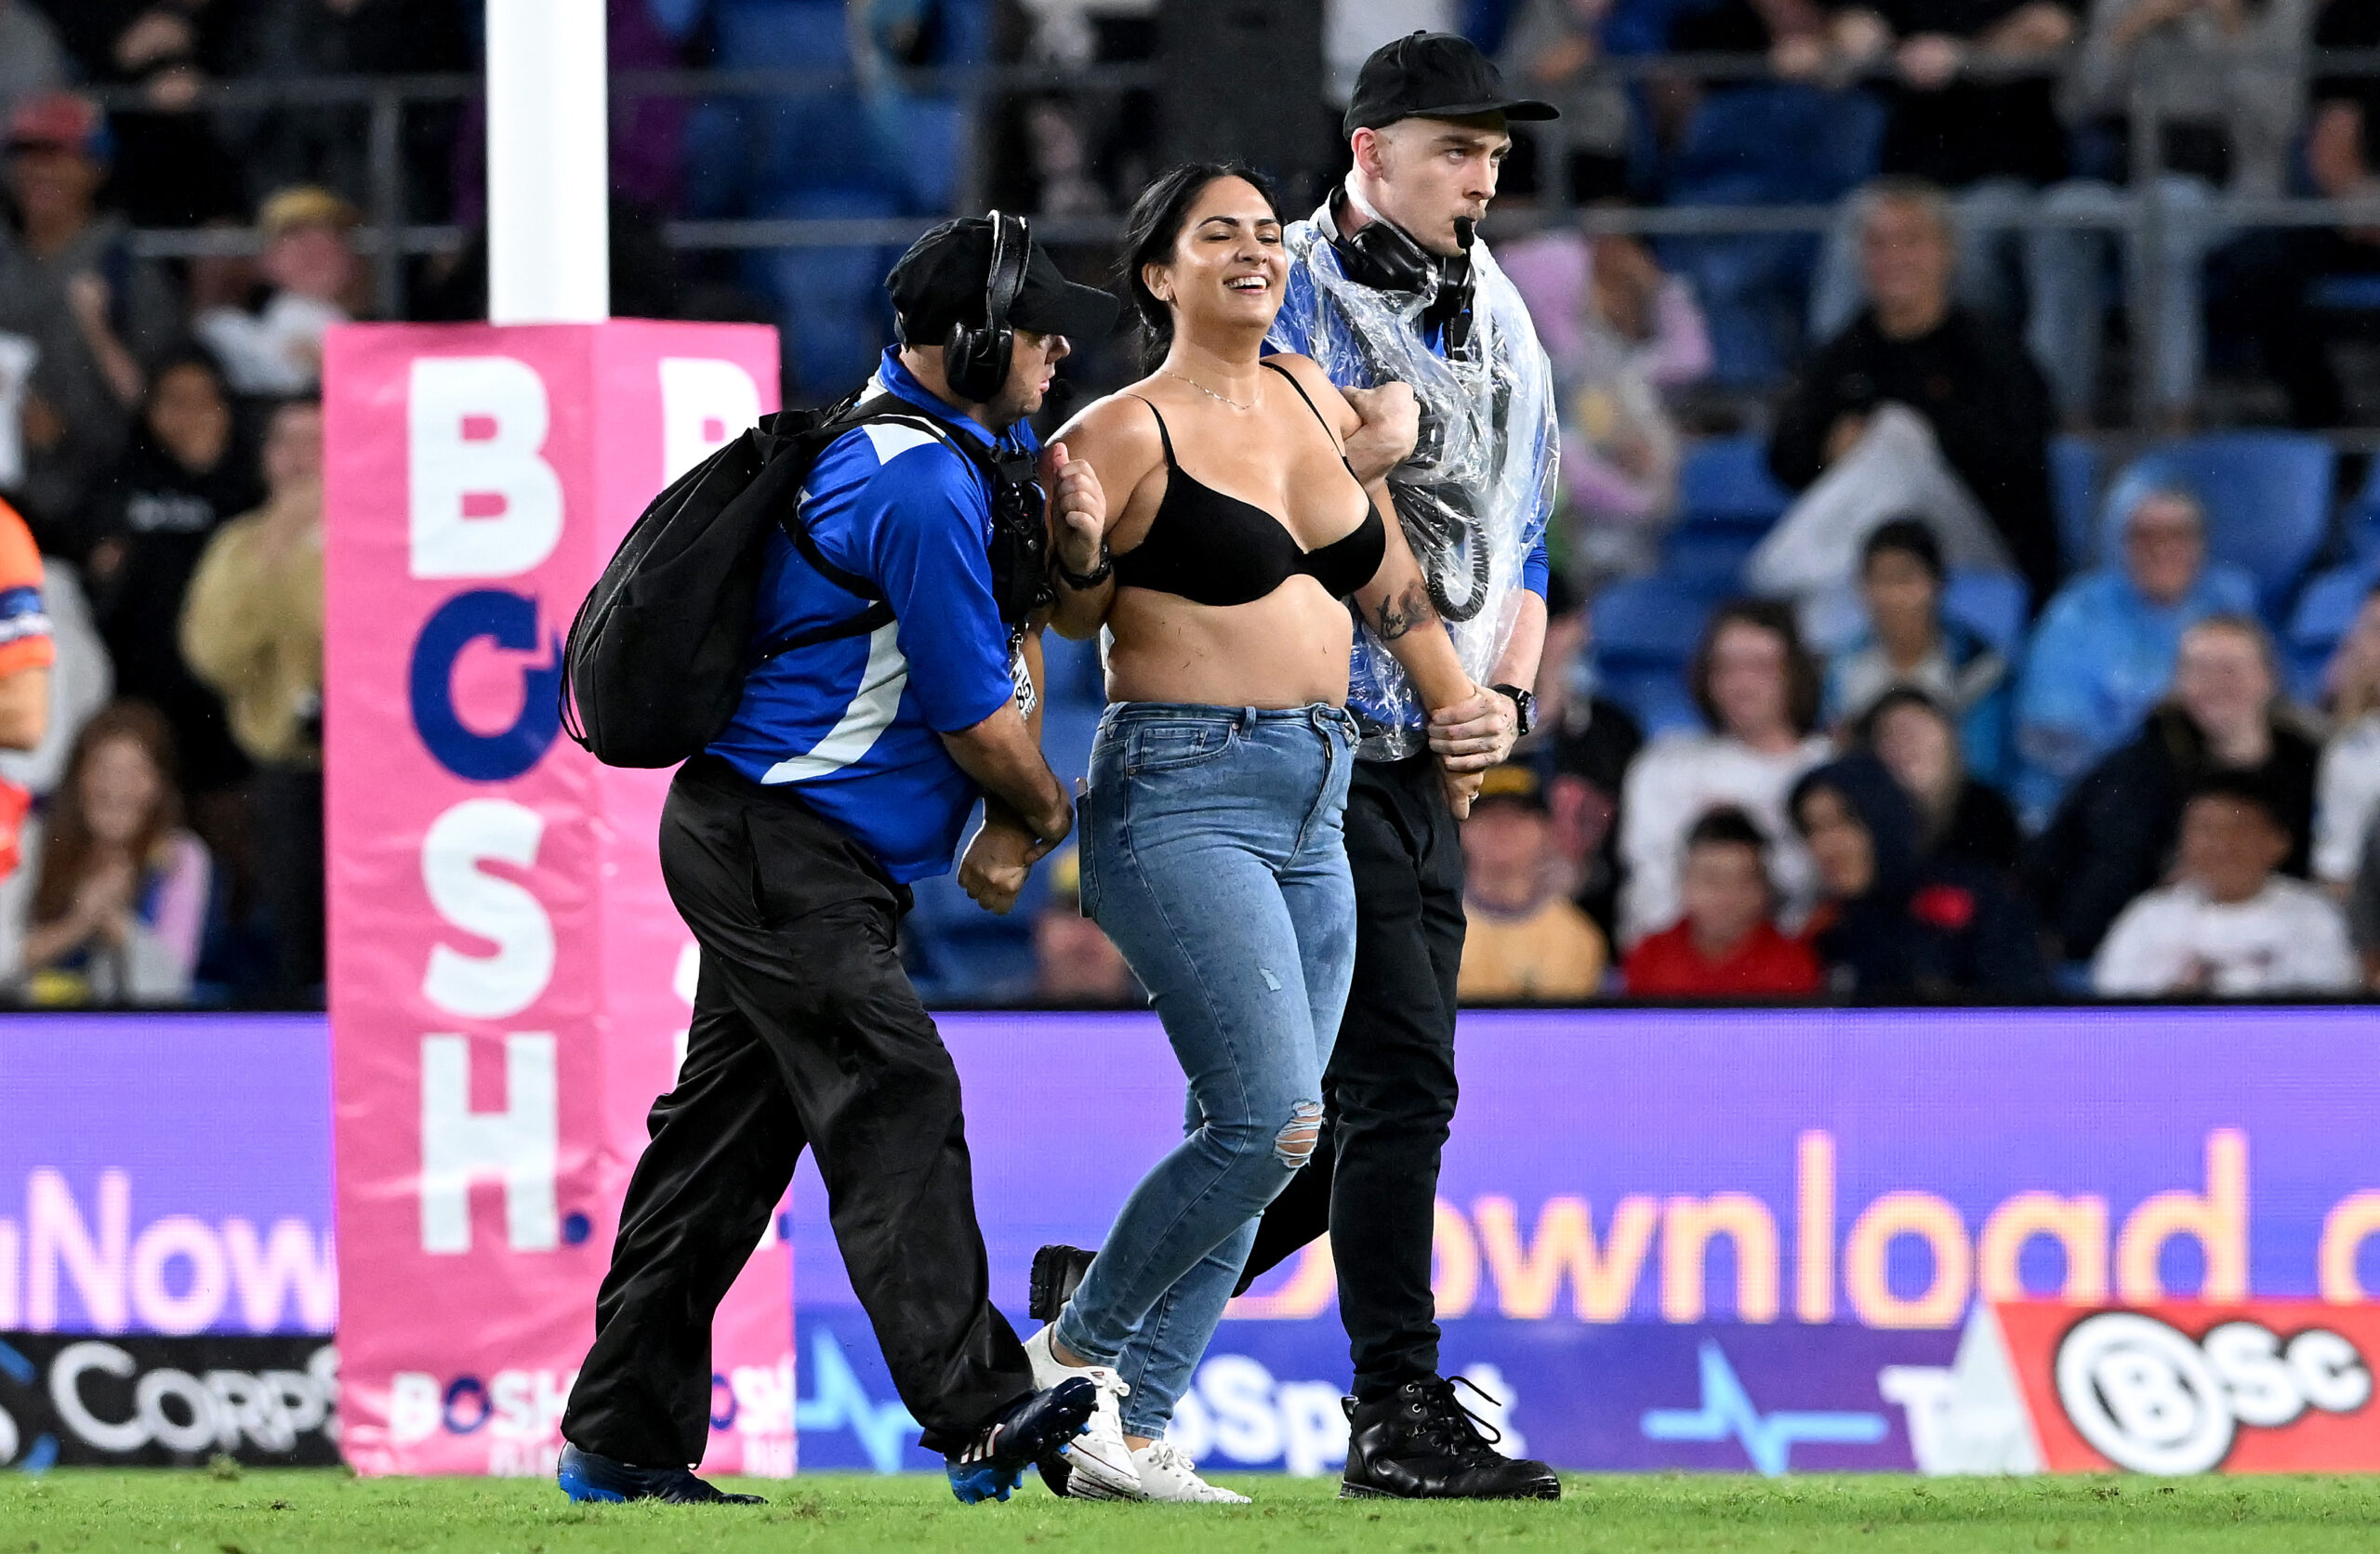 GOLD COAST, AUSTRALIA - APRIL 09: A pitch invader is taken from the field by security guards during the round five NRL match between the Gold Coast Titans and the Parramatta Eels at Cbus Super Stadium, on April 09 2022, in Gold Coast, Australia. (Photo by Bradley Kanaris/Getty Images)